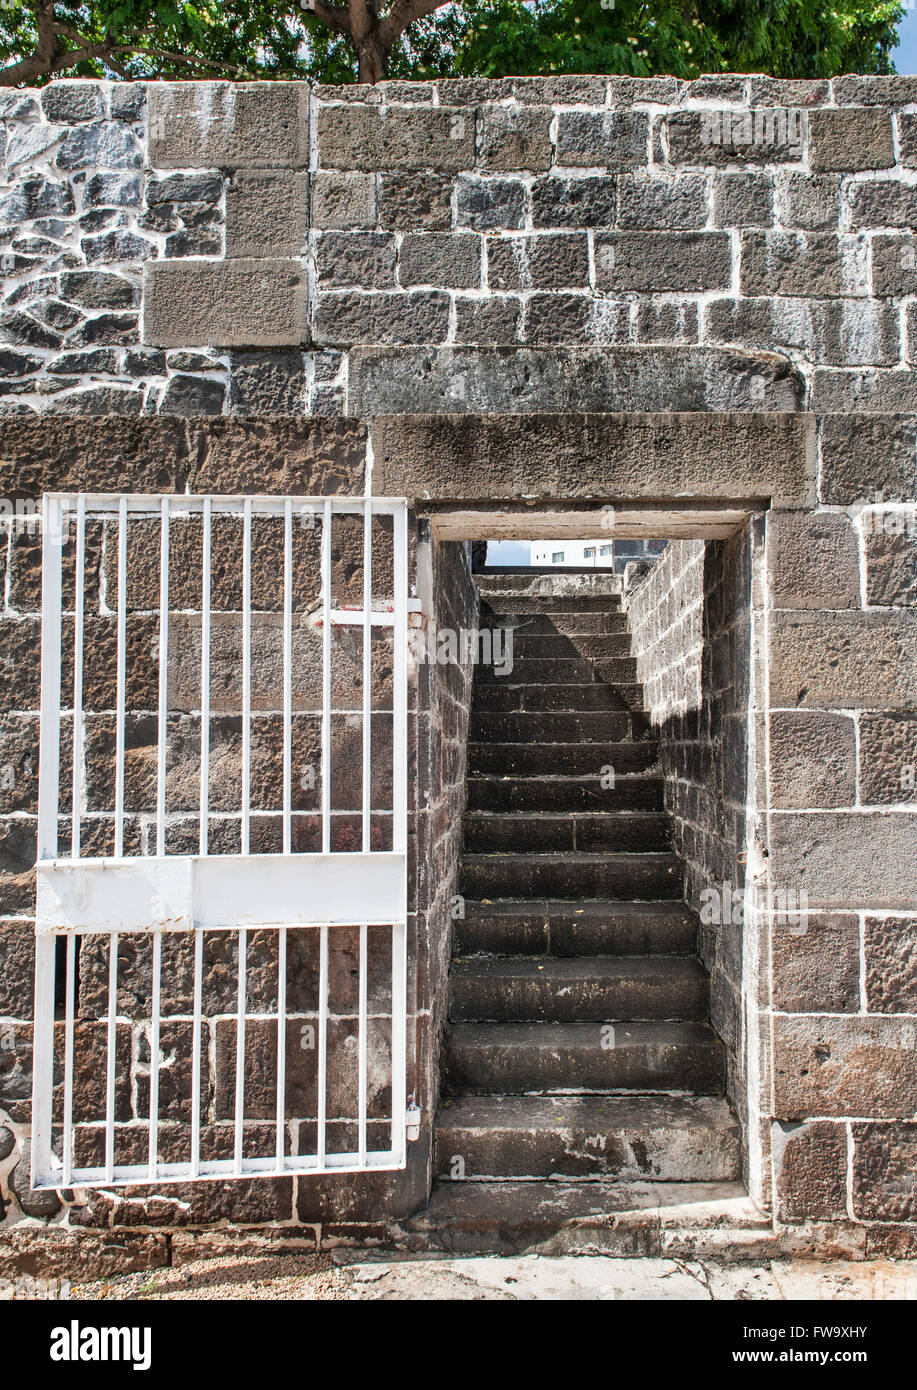 Steps of Aapravasi Ghat (the immigration depot) in Port Louis, the capital of Mauritius. Stock Photo